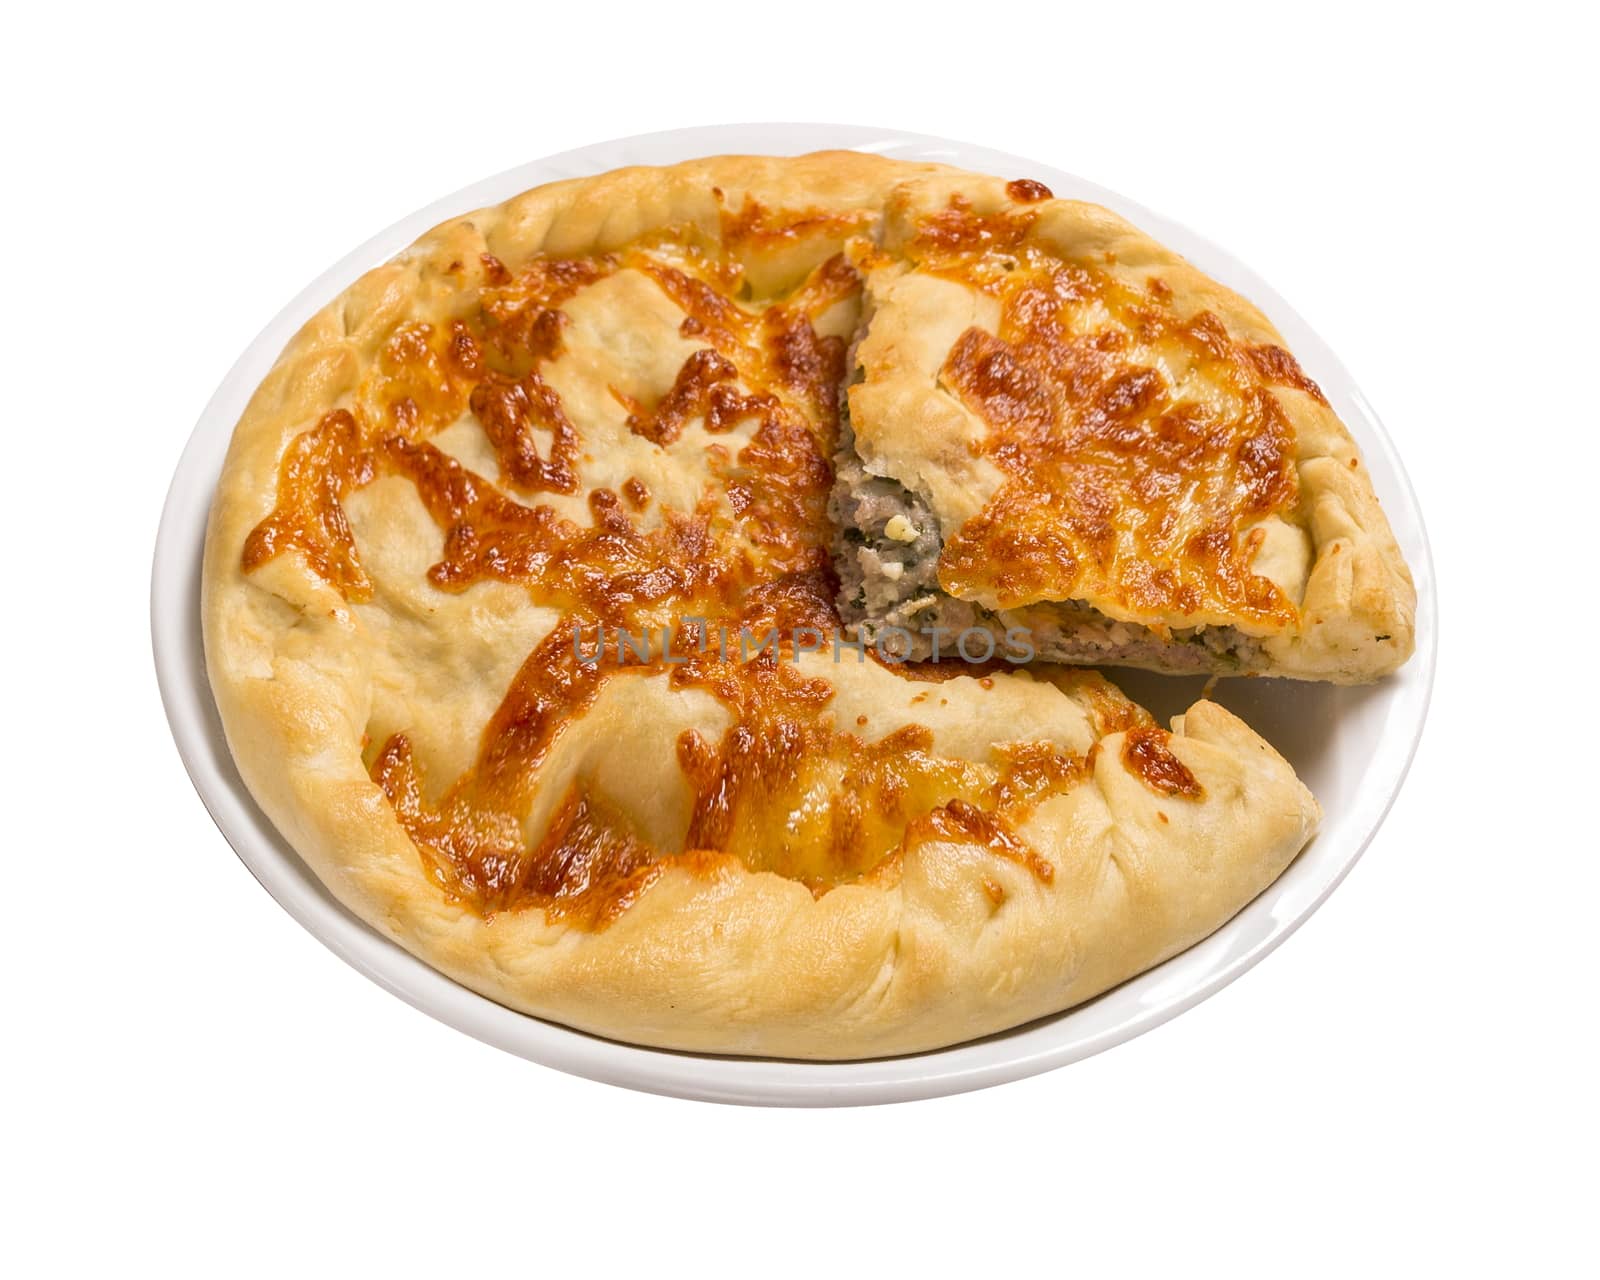 Khachapuri with meat and cilantro. Isolated image on white background. by 977_ReX_977